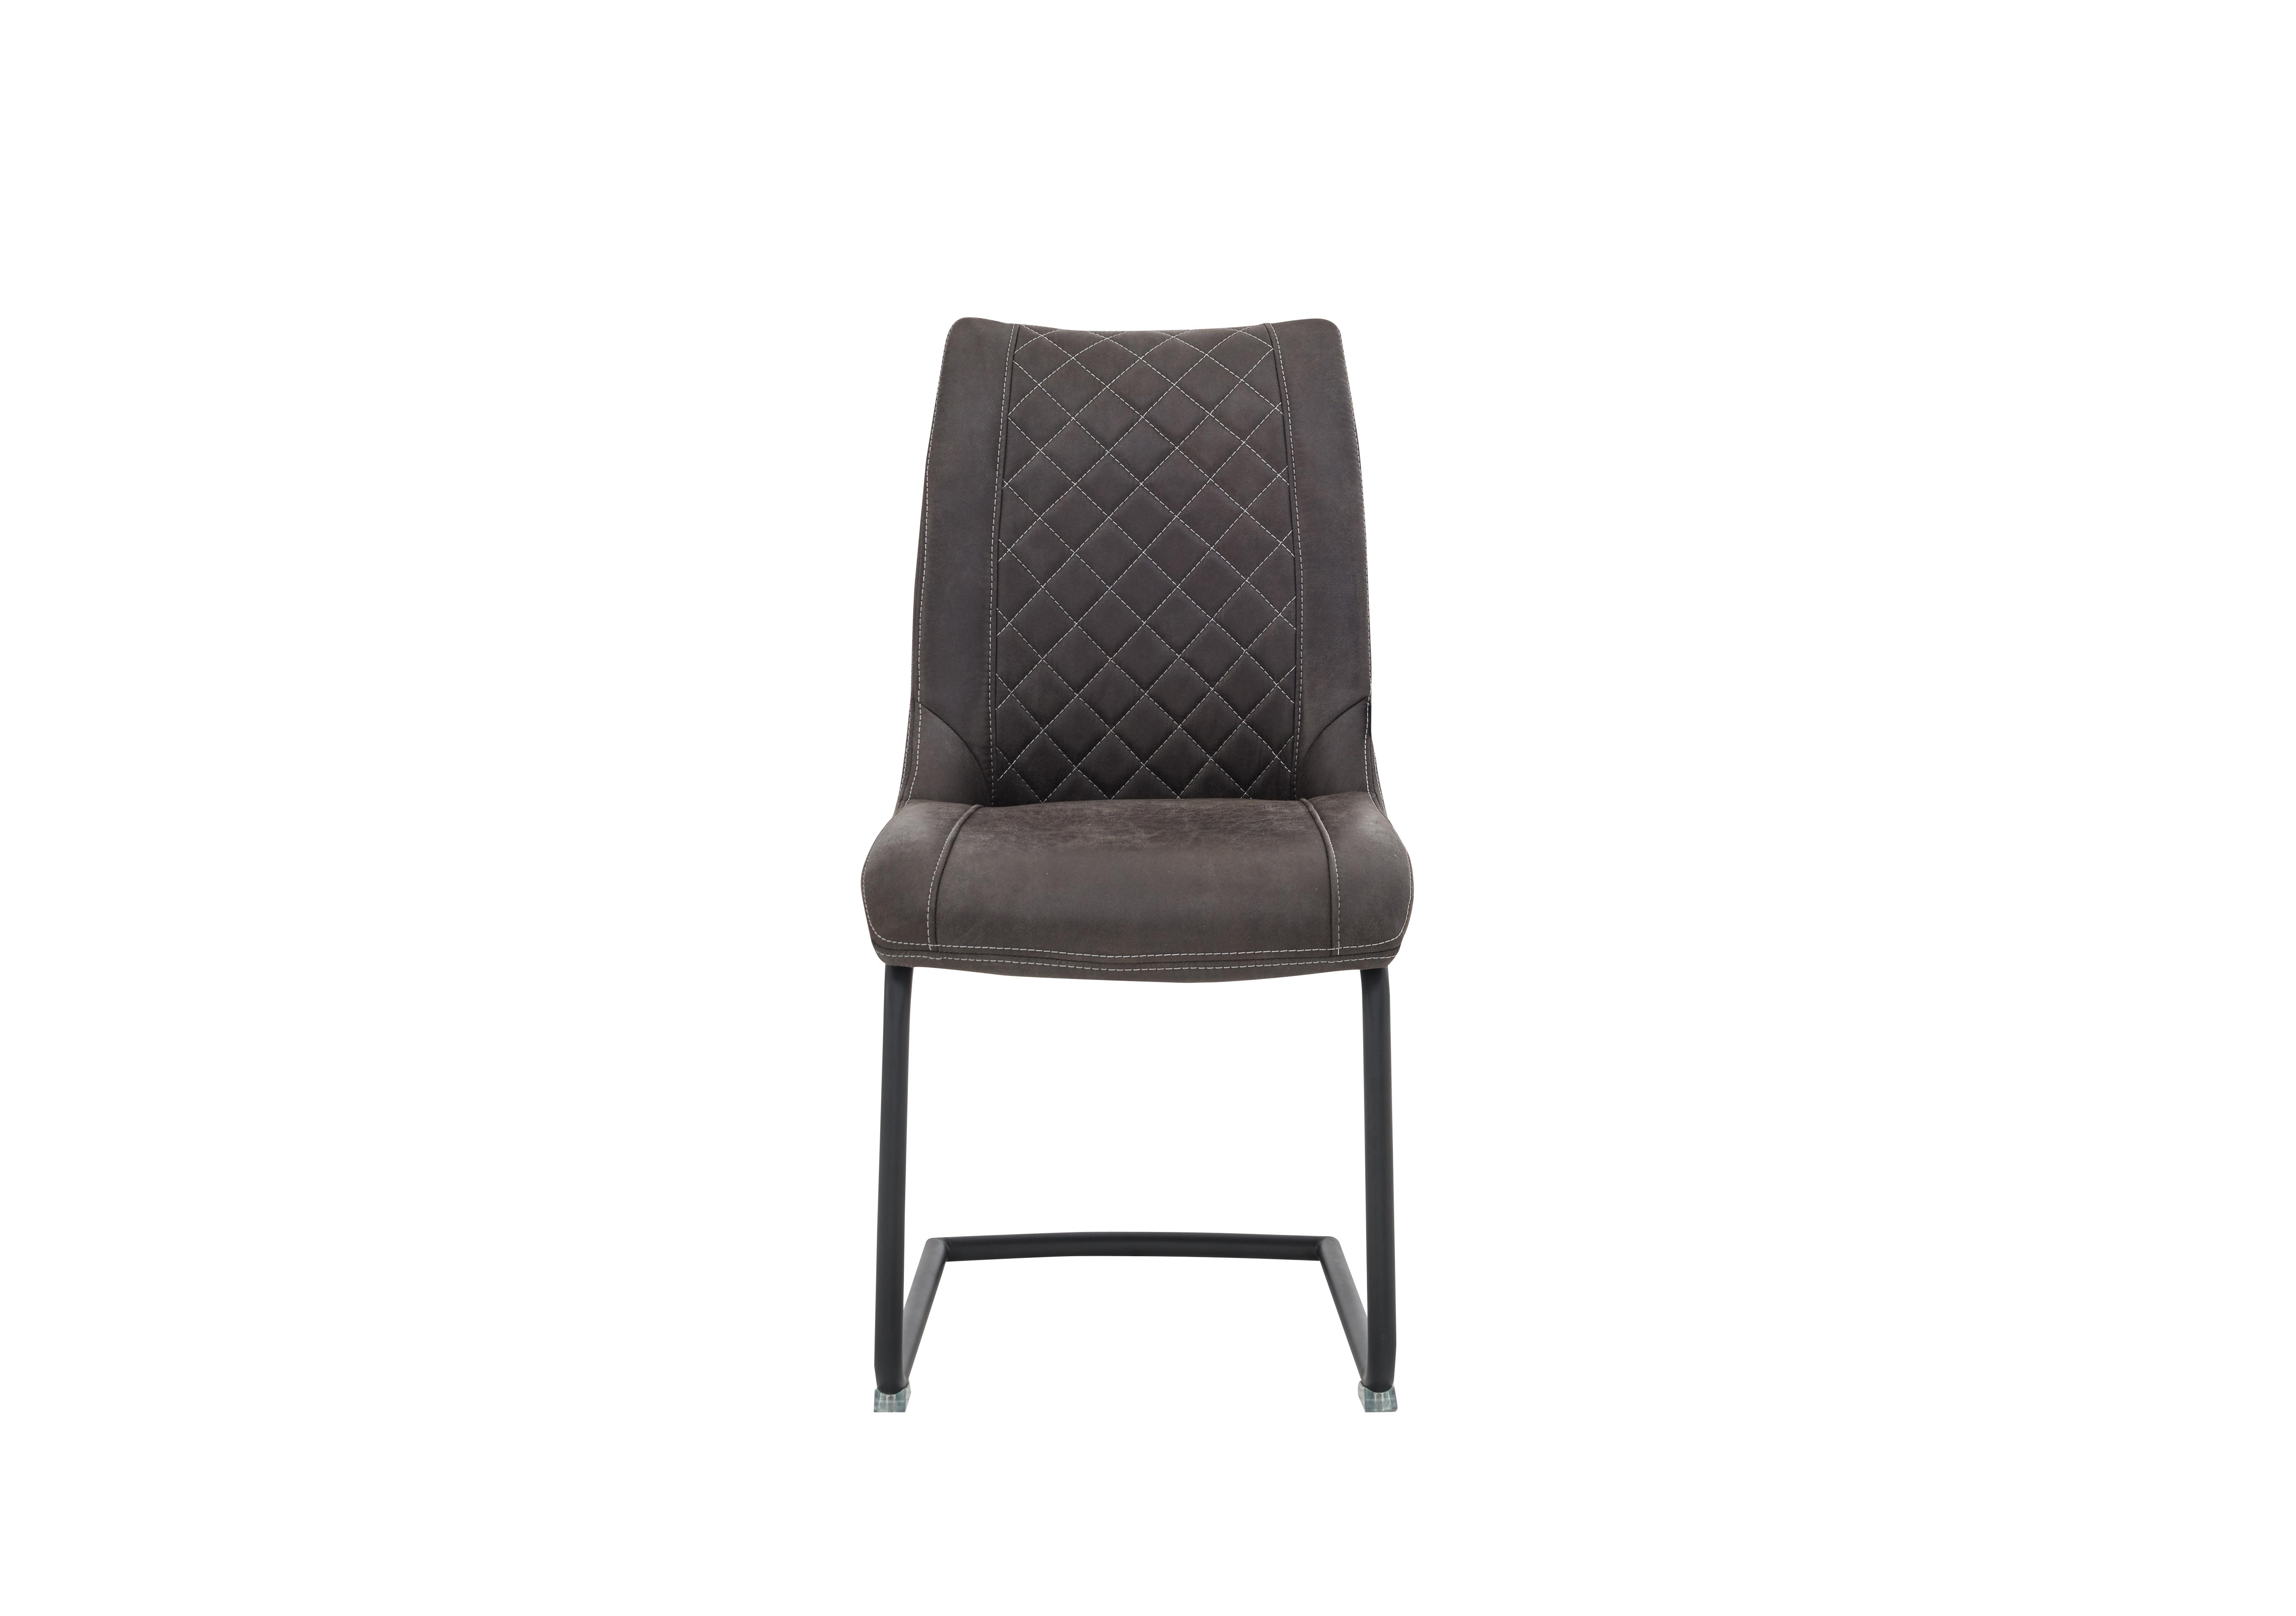 Baltimore Dining Chair in Anthracite on Furniture Village